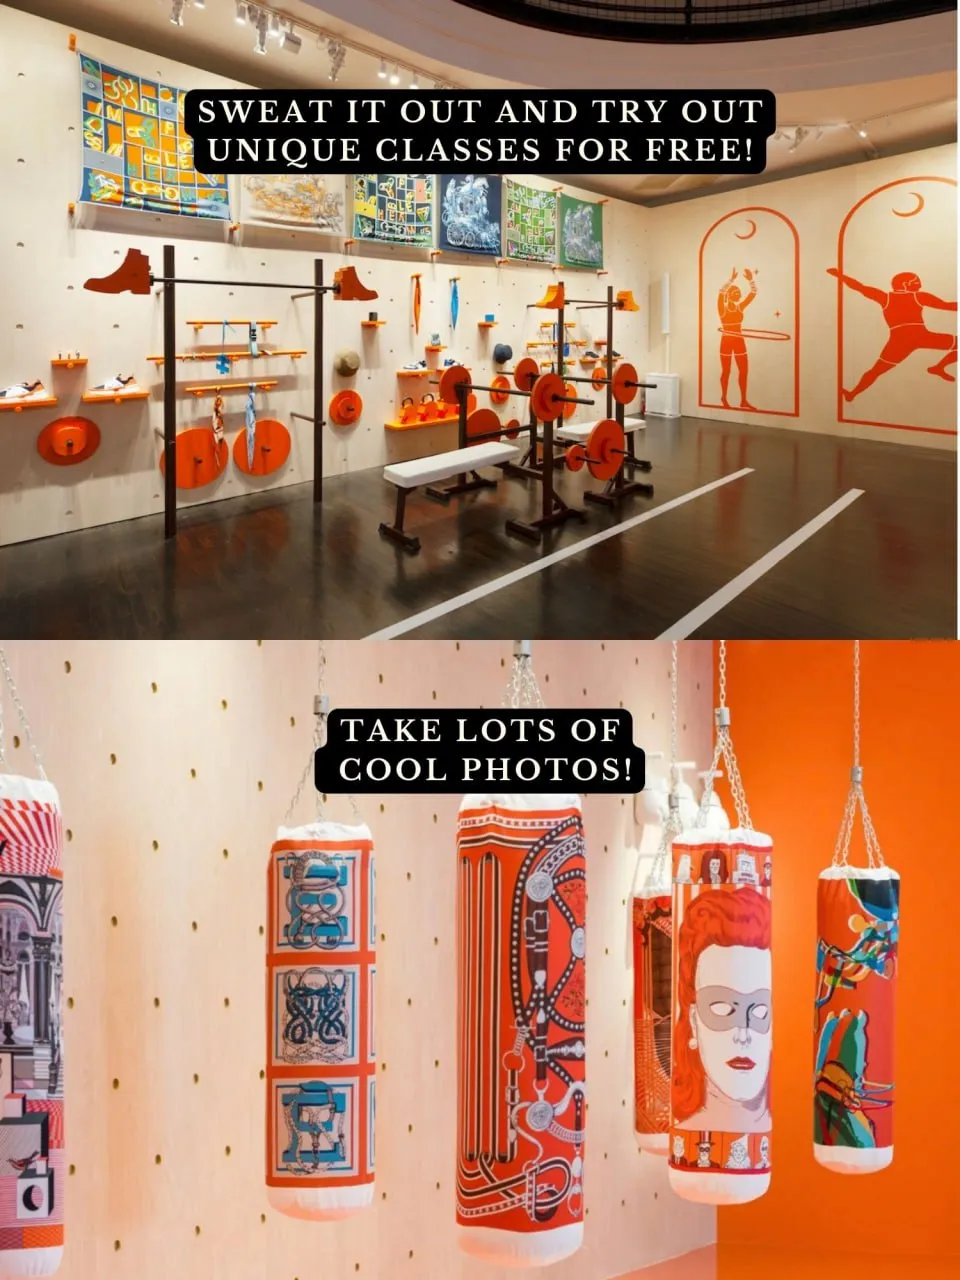 Hermès Fit, a pop-up featuring its very own gym, adorned with hermes'  signature orange color and pattern, while also exhibiting some of its…